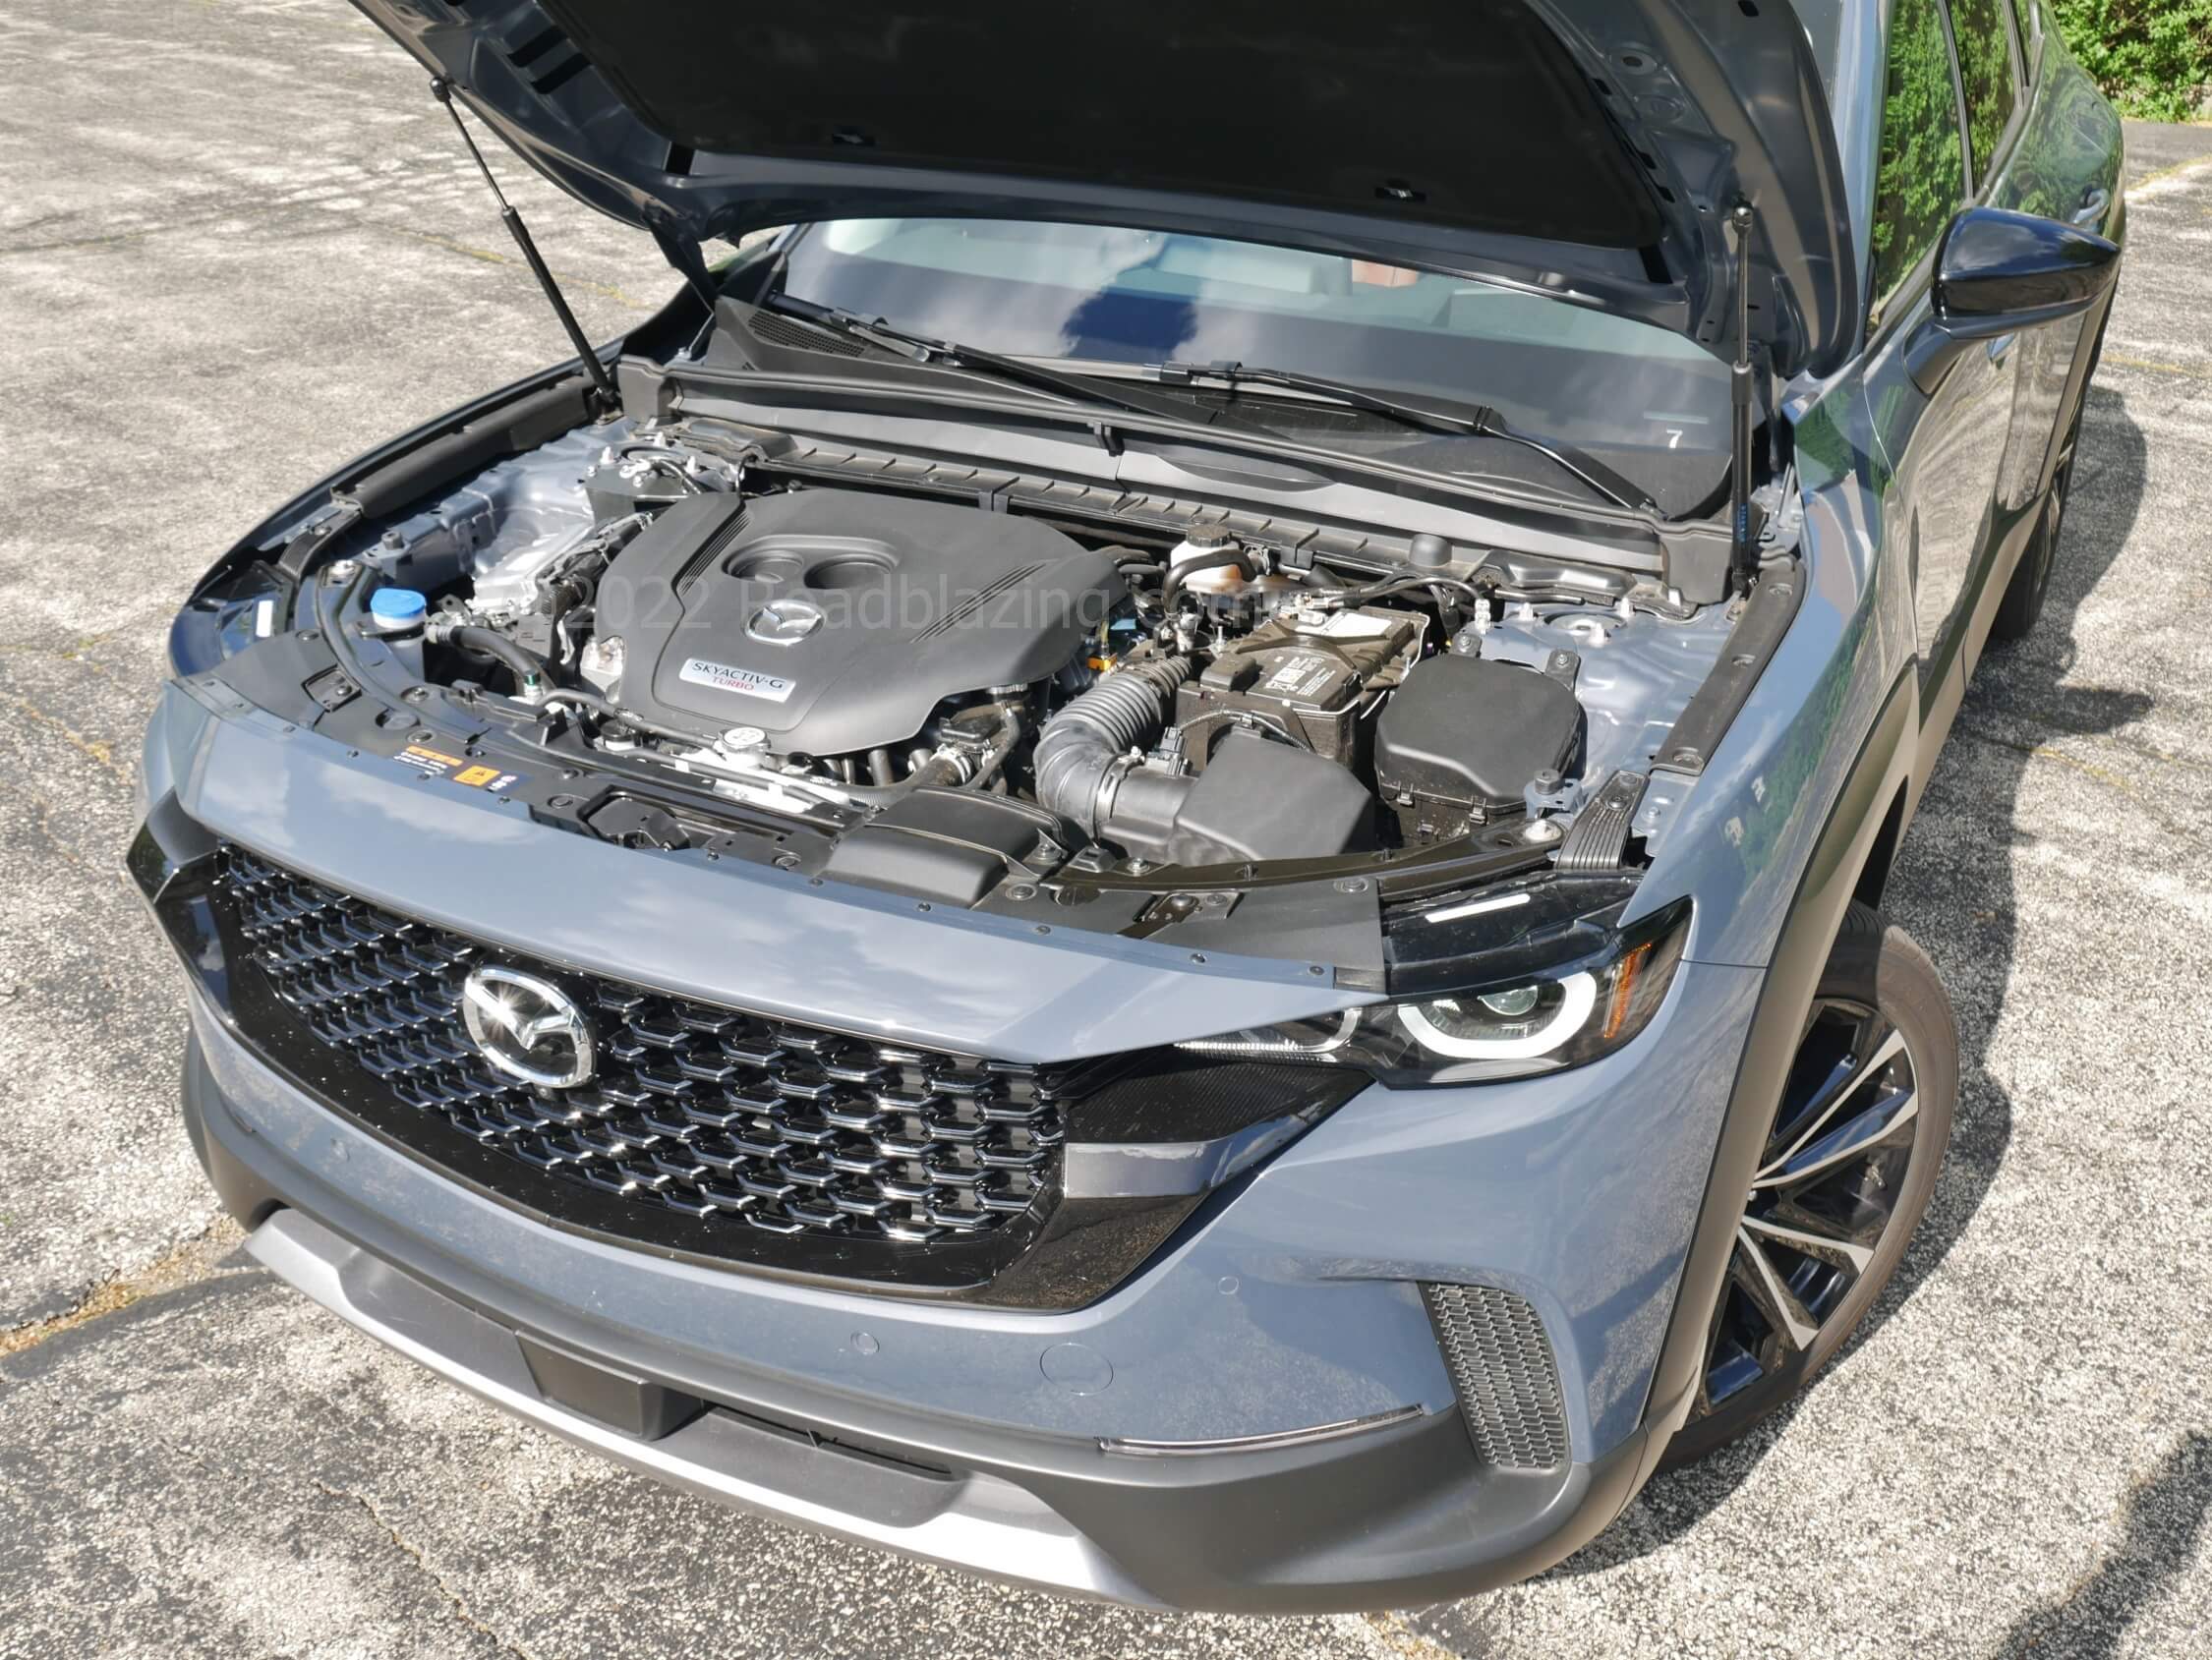 2023 Mazda CX-50 2.5 Turbo: well fortified 256 hp, 320 lb-ft turbo engine = 22 combined MPG